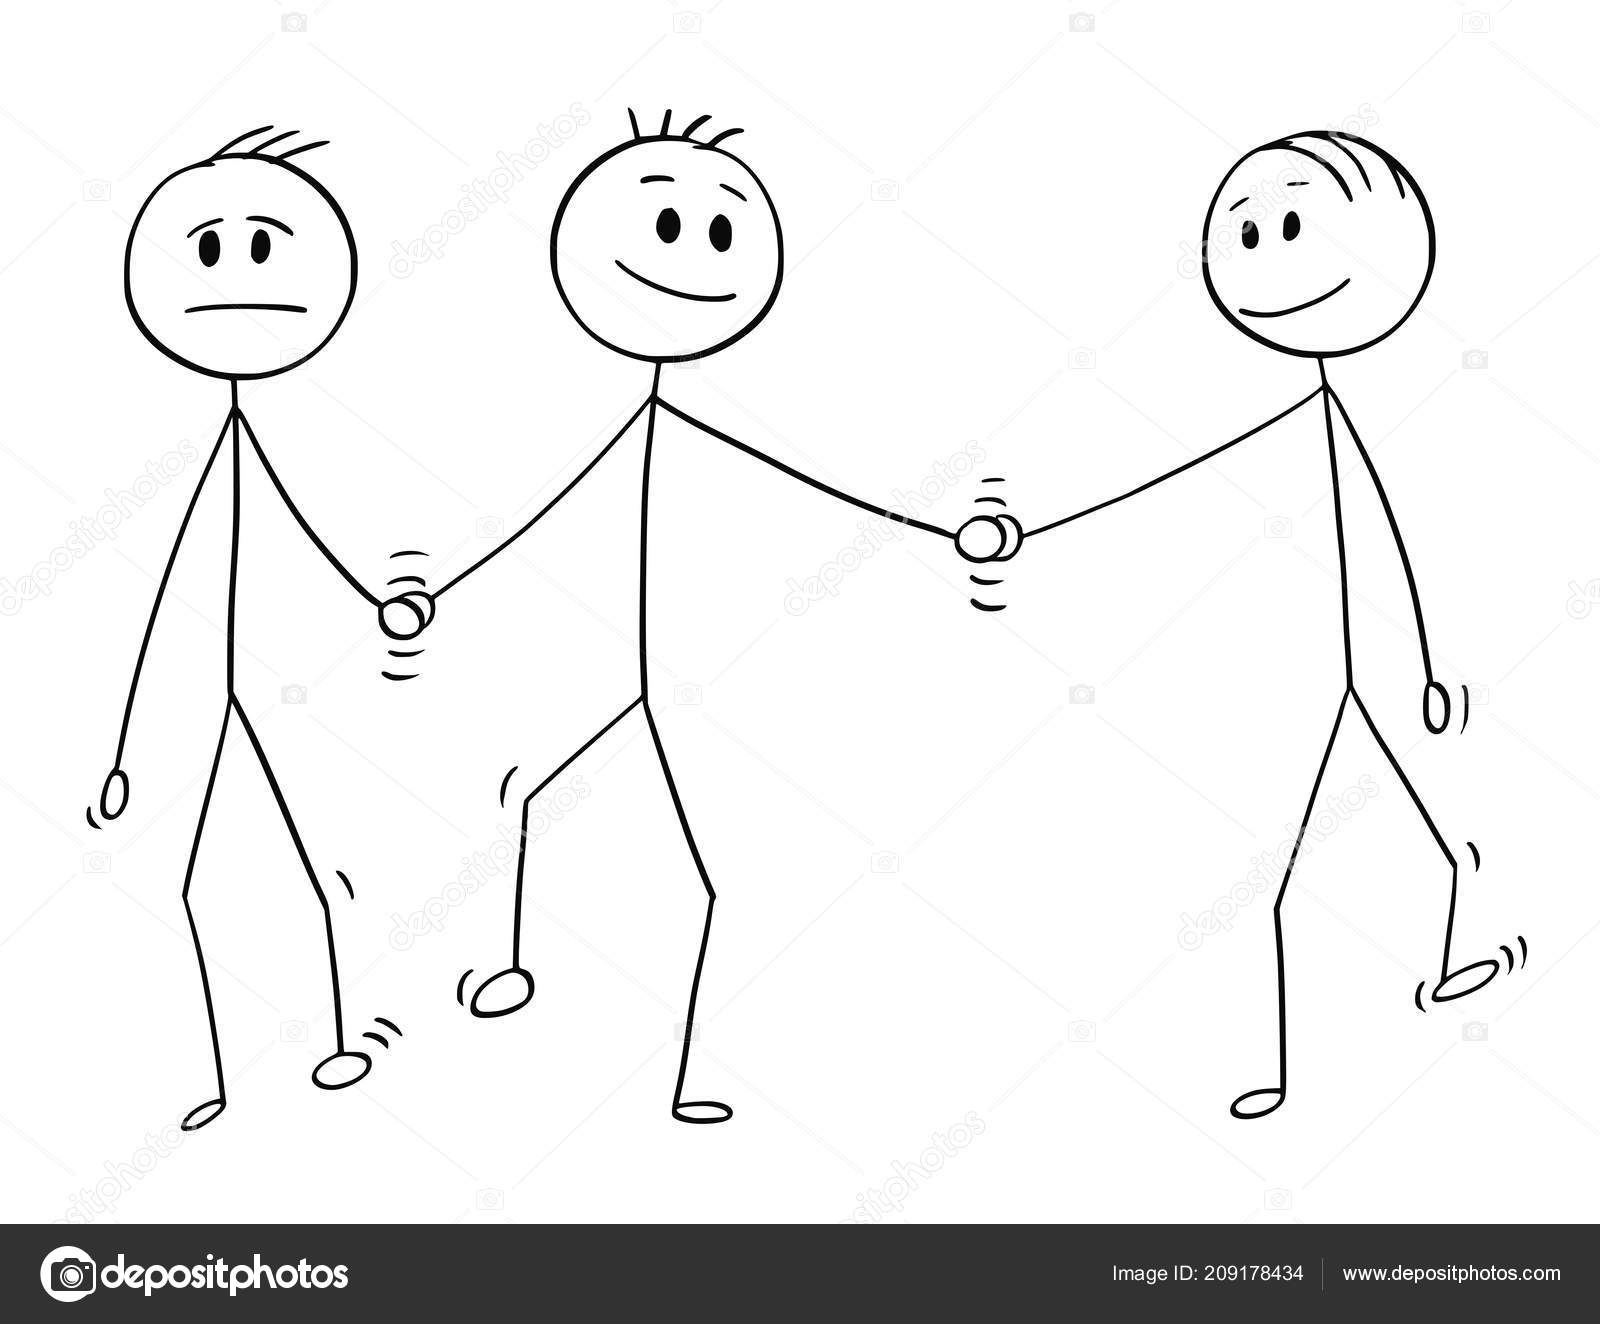 Featured image of post Stick Men Holding Hands Stick man celebrates holding both hands up surrounded by other stick men icons vector illustration